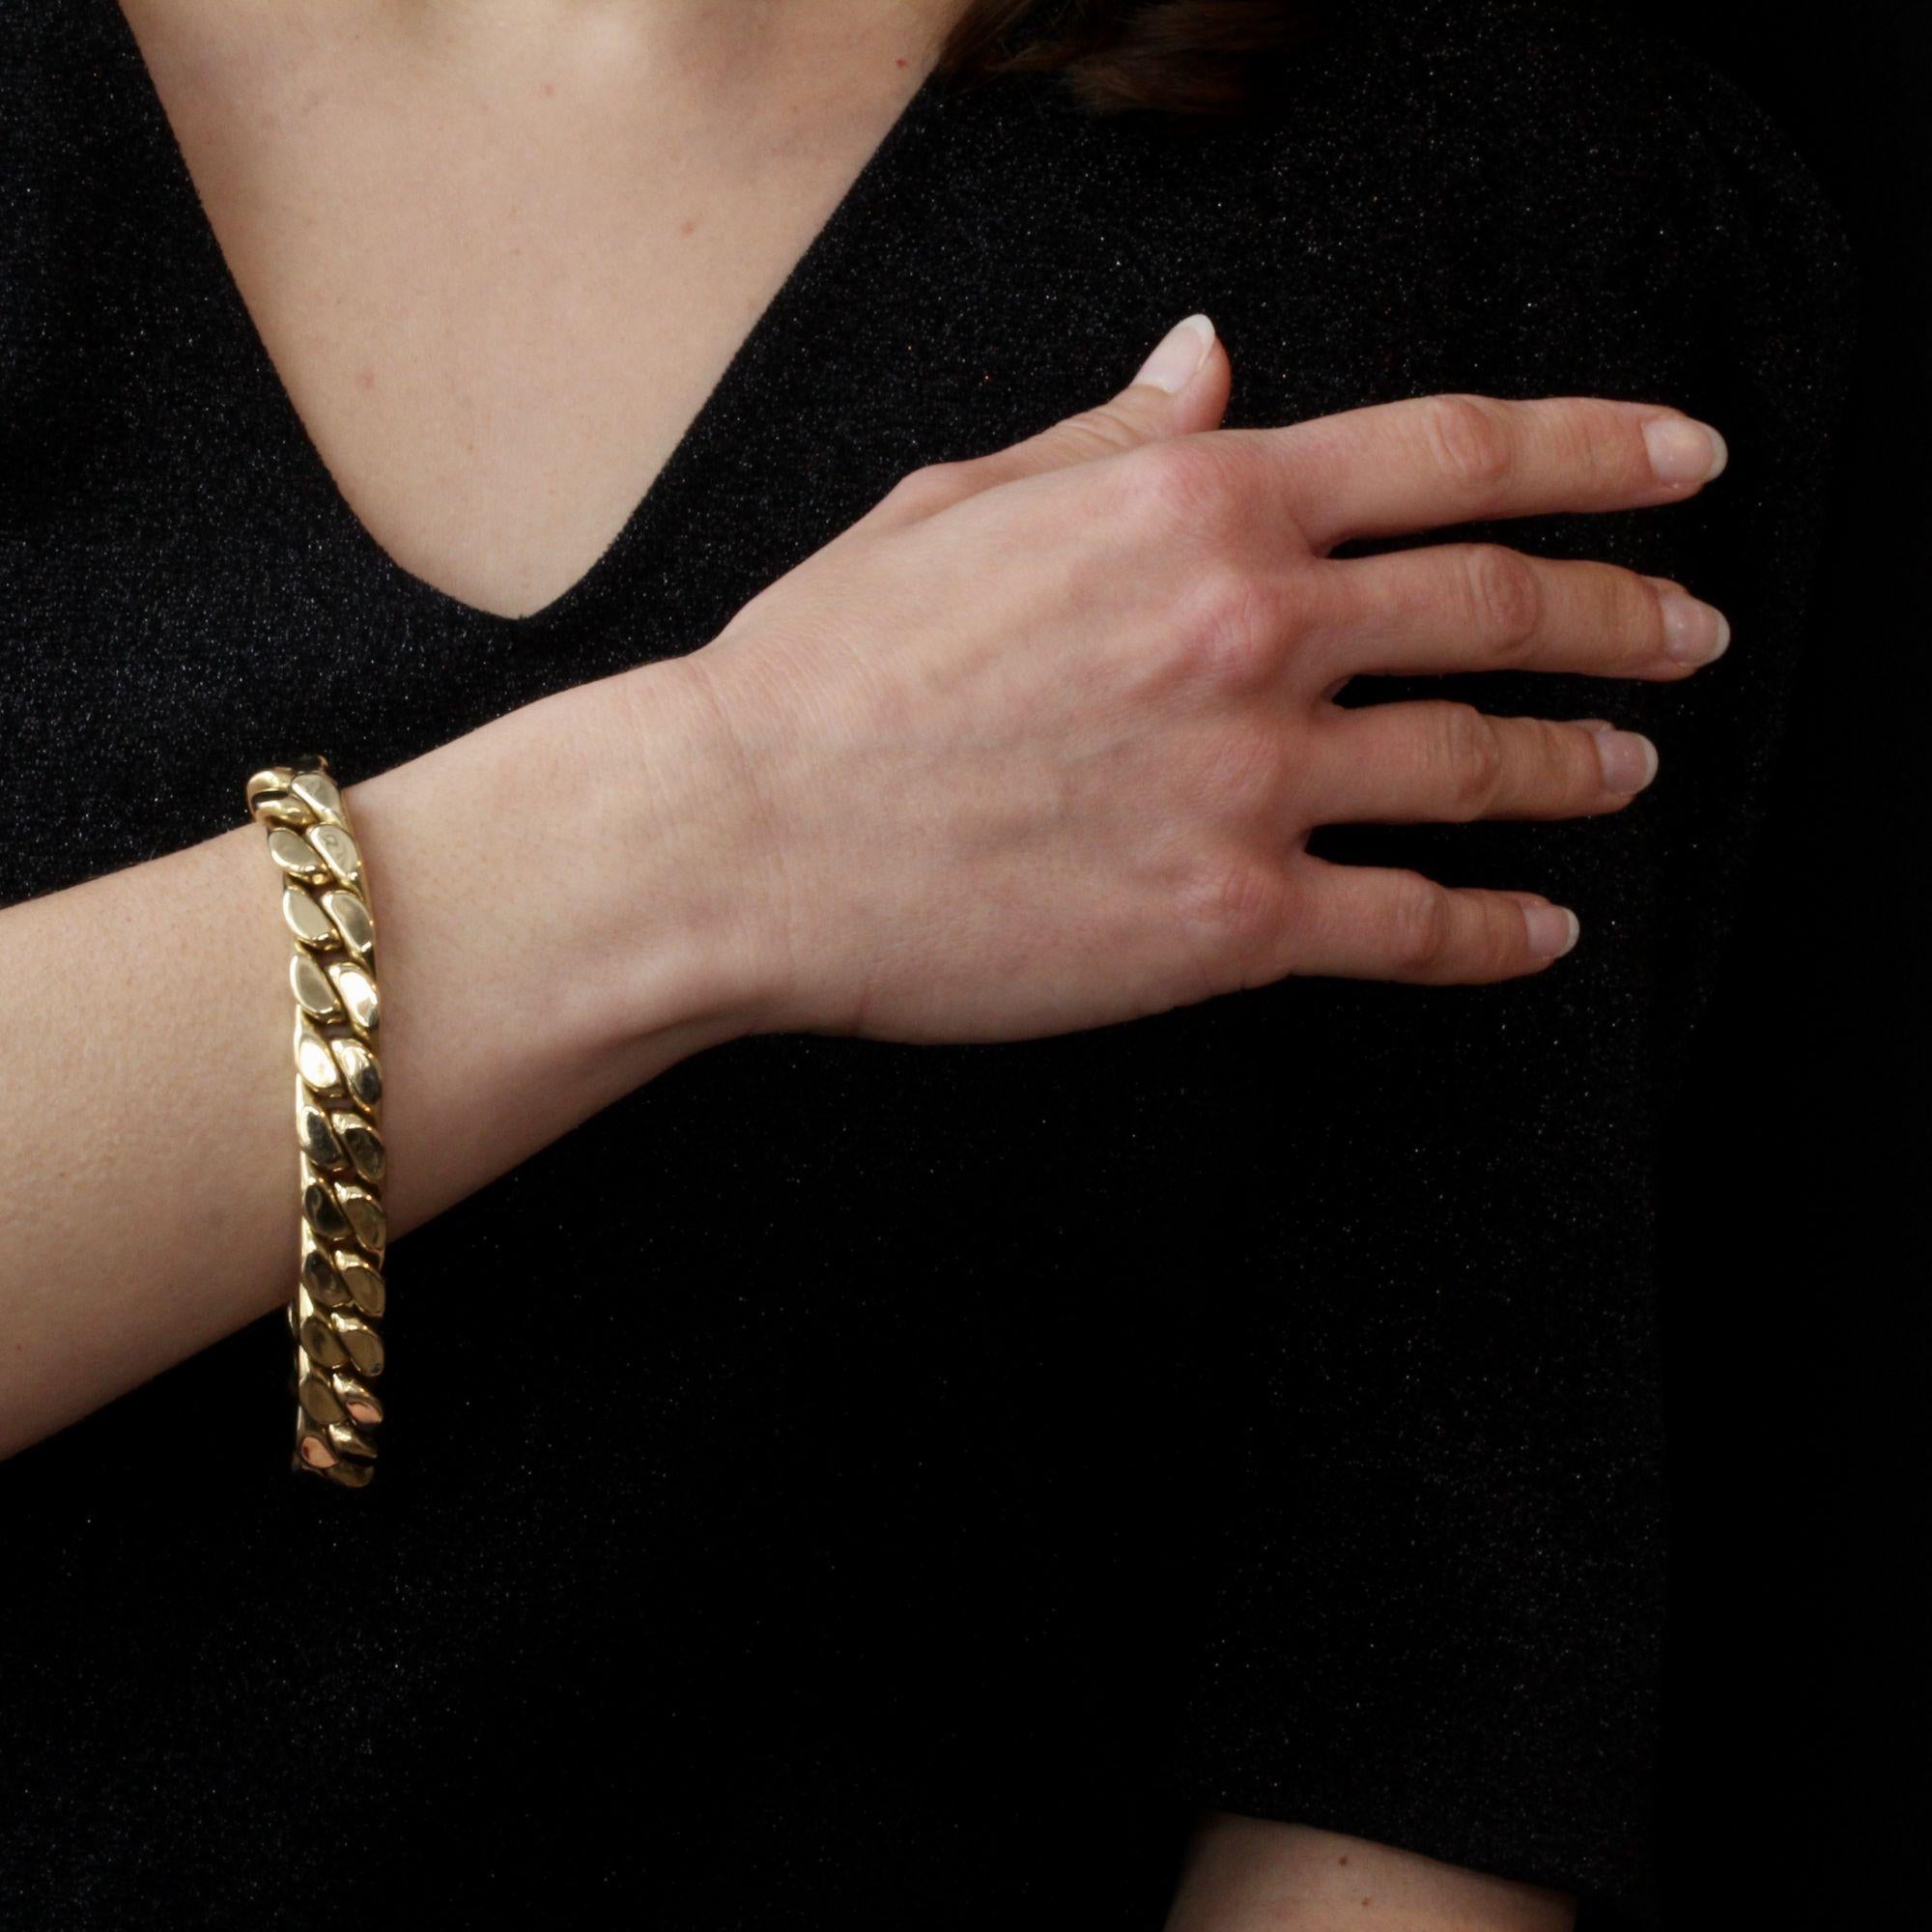 Bracelet in 18 karat yellow gold.
This second- hand gold bracelet is formed of a large flattened curb chain. The clasp is ratchet with two safety 